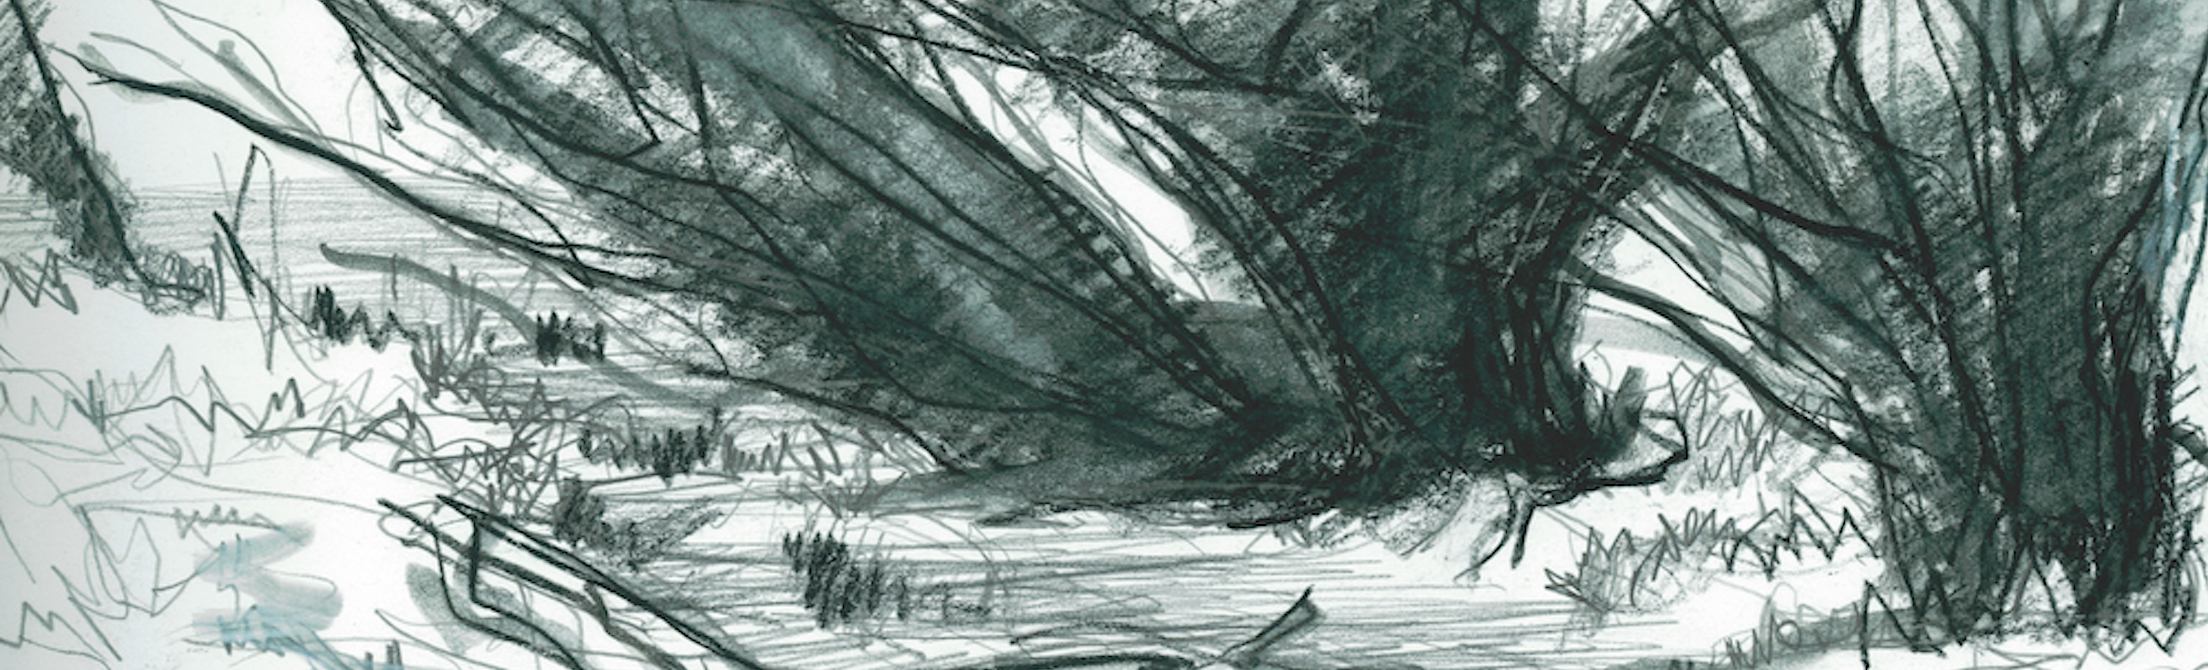 sketch of a creek with willows